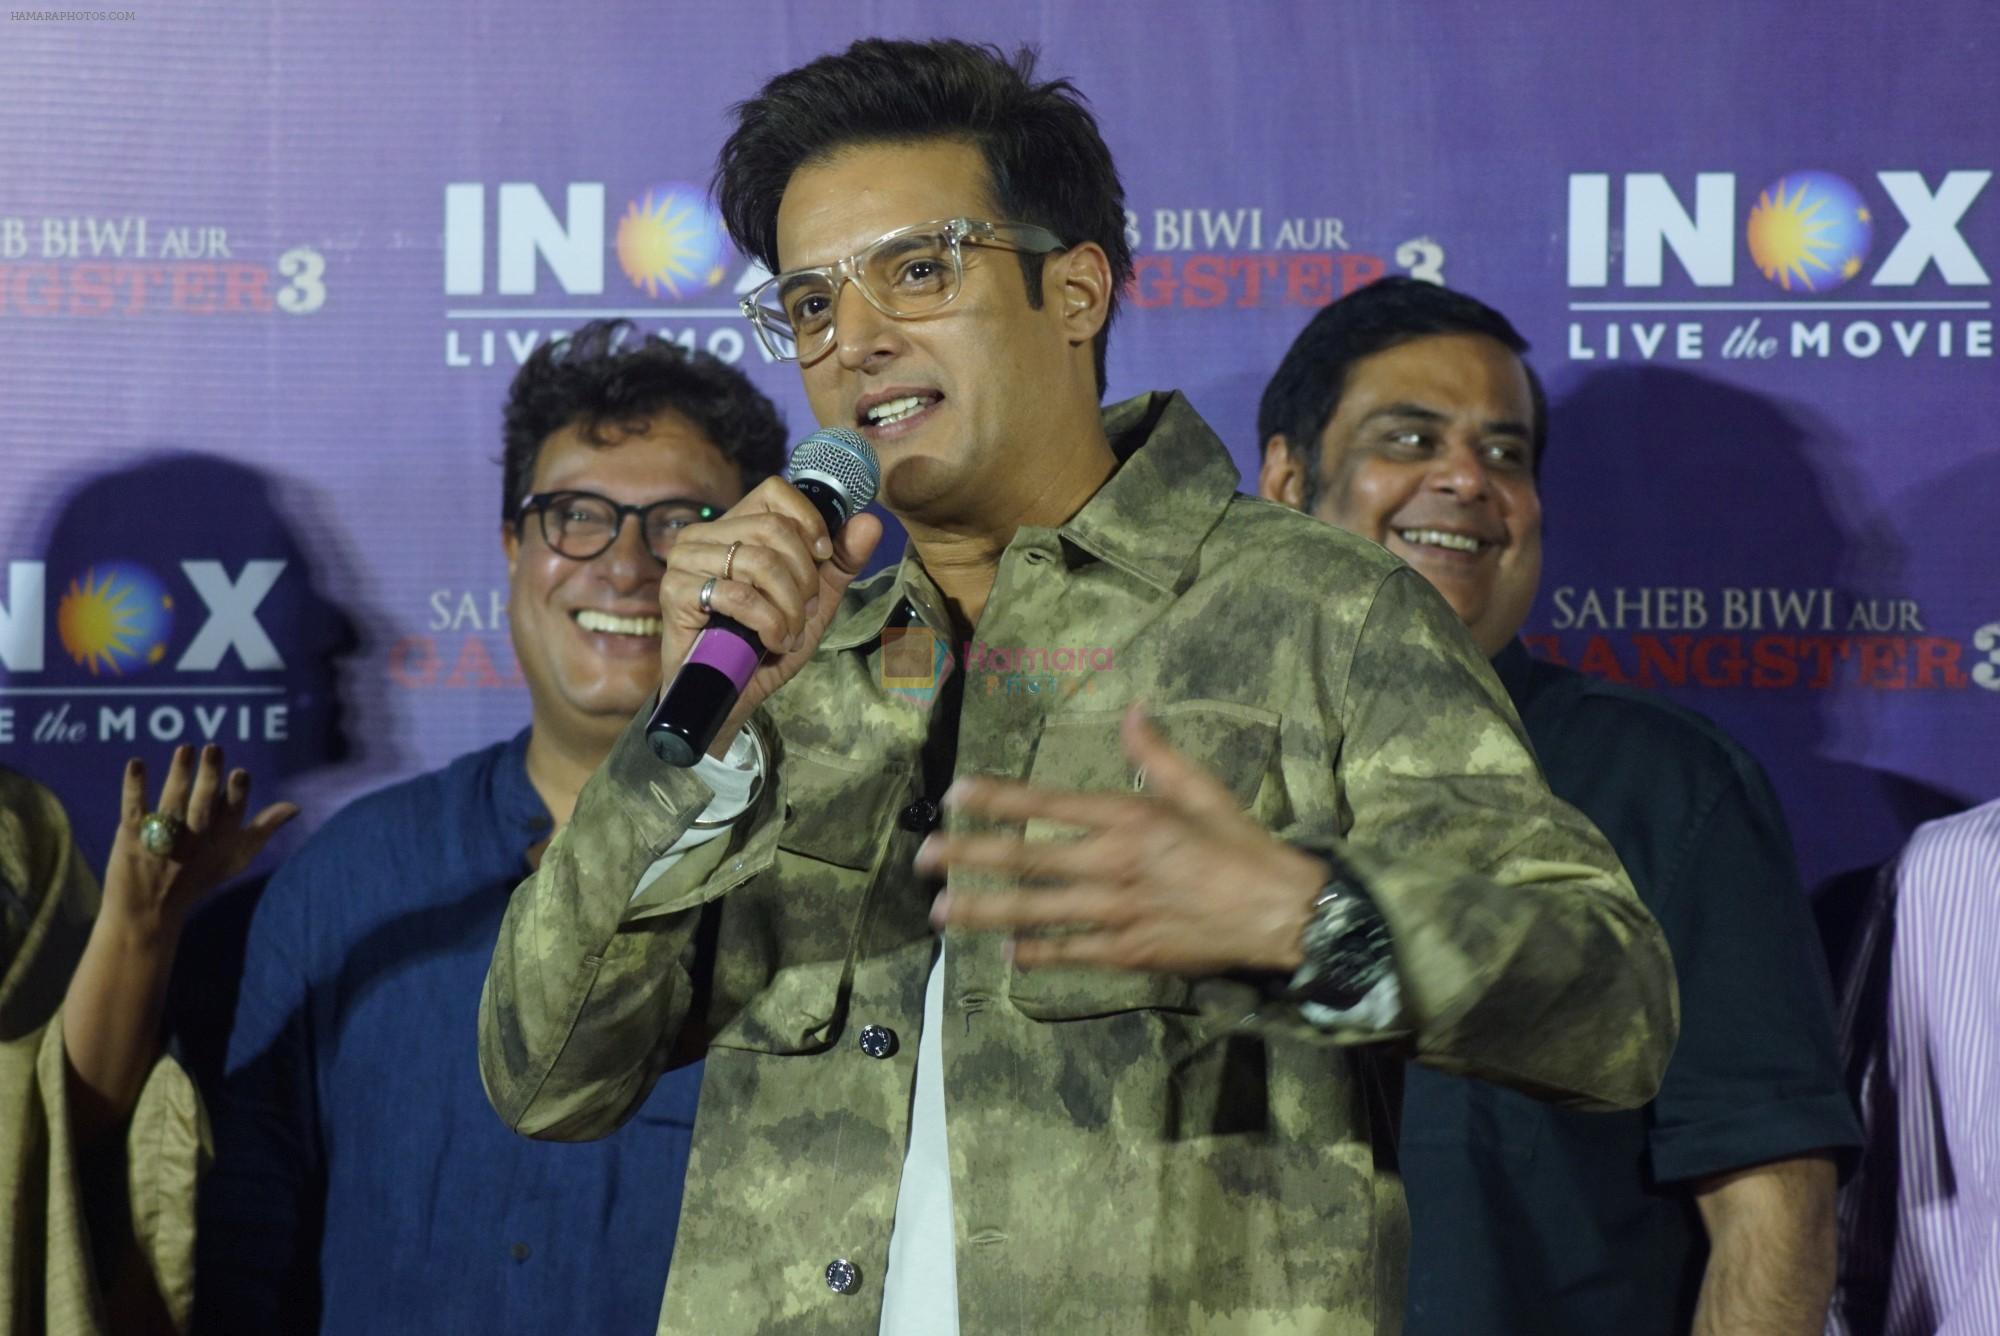 Jimmy Shergill at the Song Lauch Of Saheb Biwi Aur Gangster 3 on 23rd July 2018